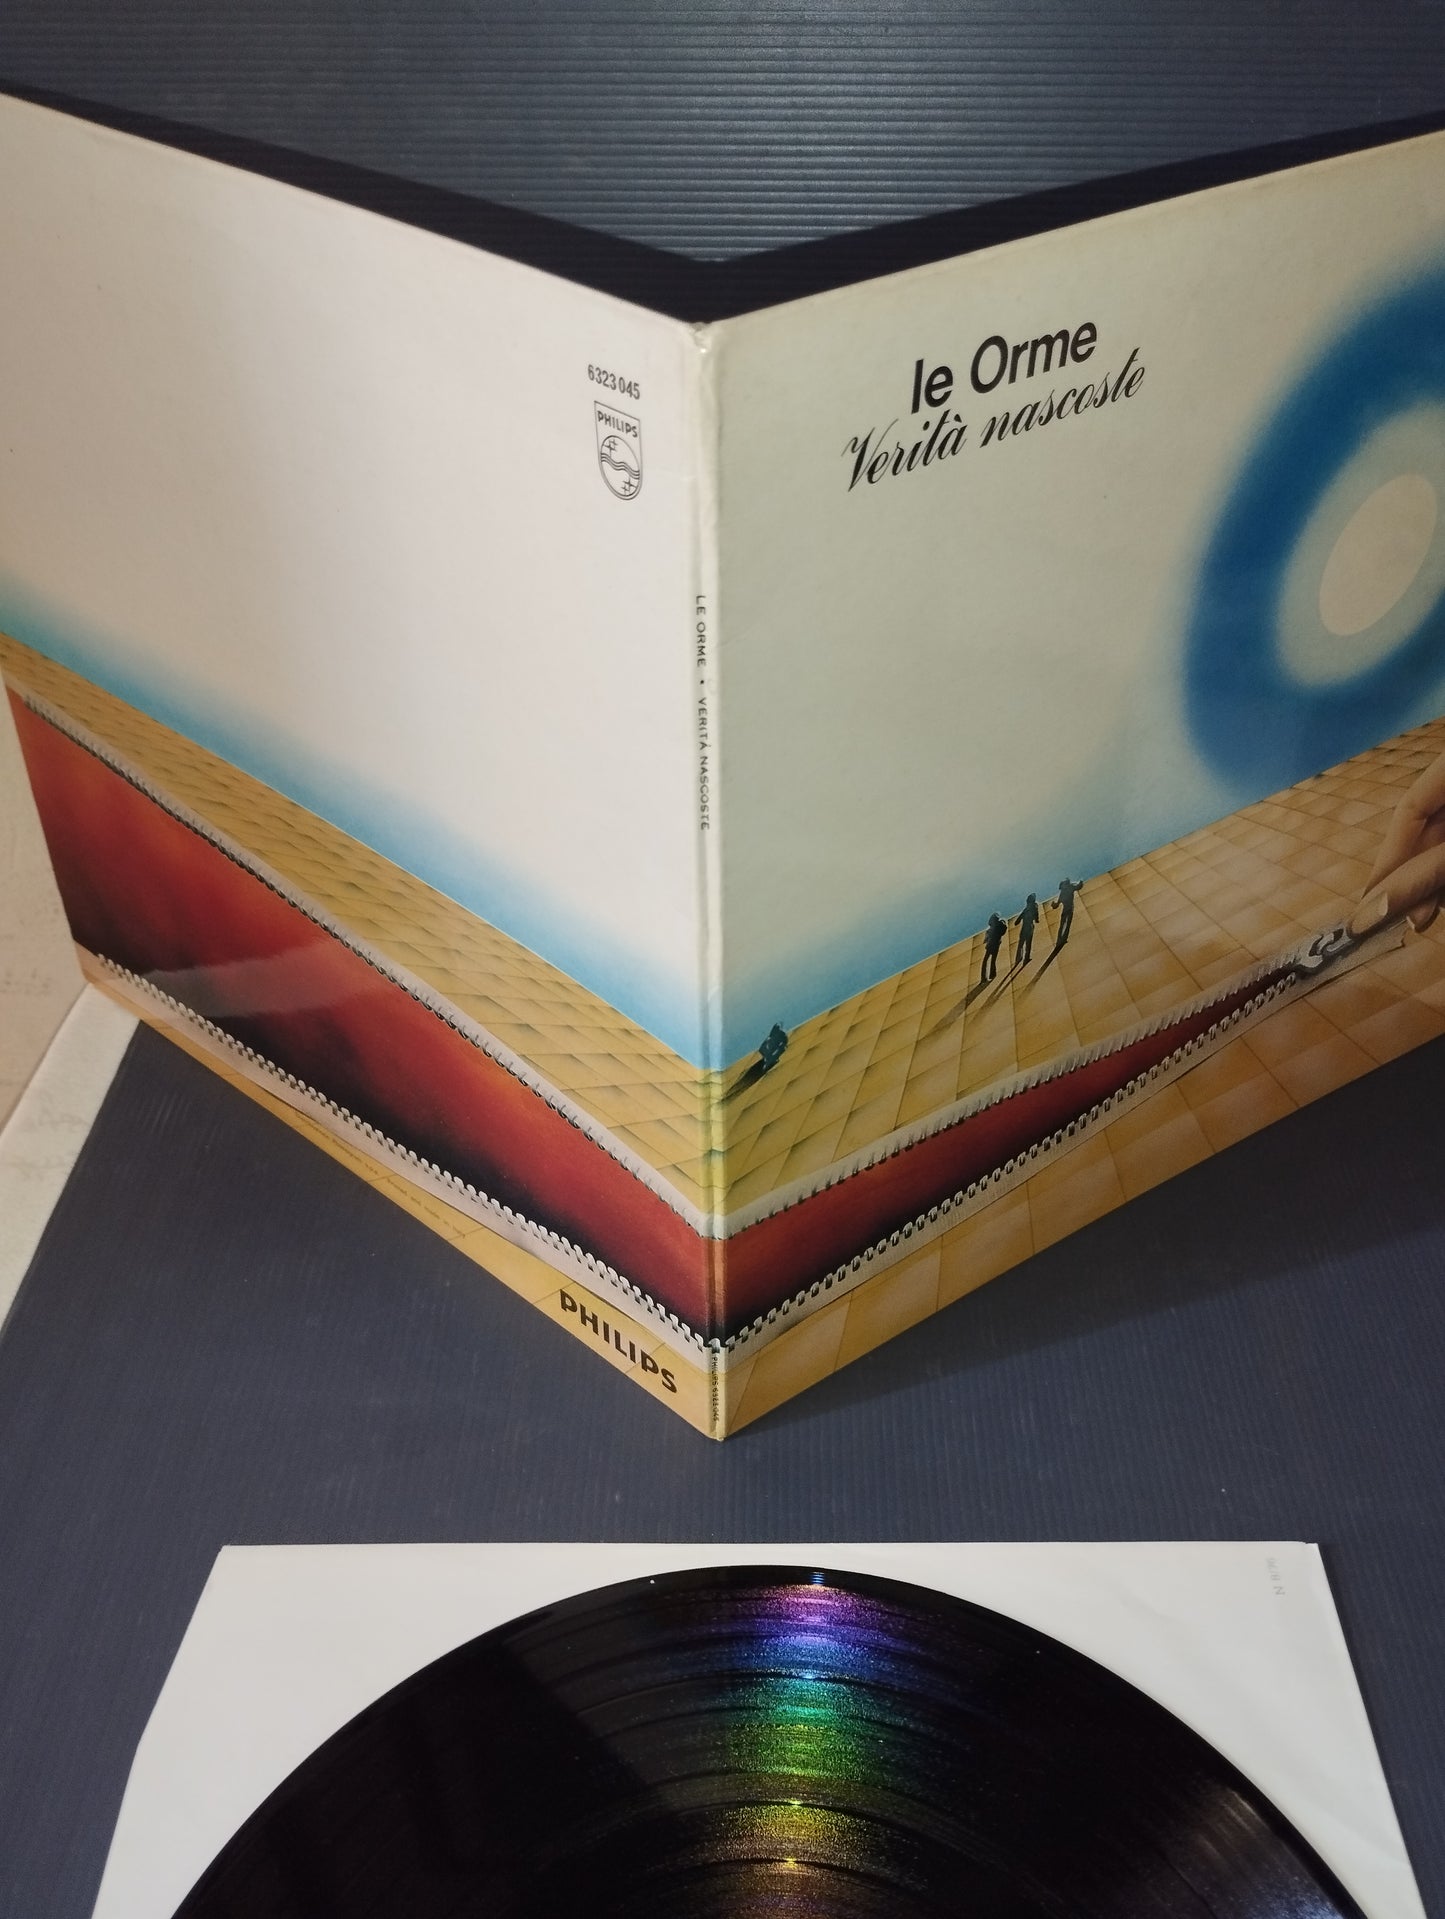 Hidden Truths" Le Orme Lp 33 Laps Published in 1976 by Philips code 6323 045